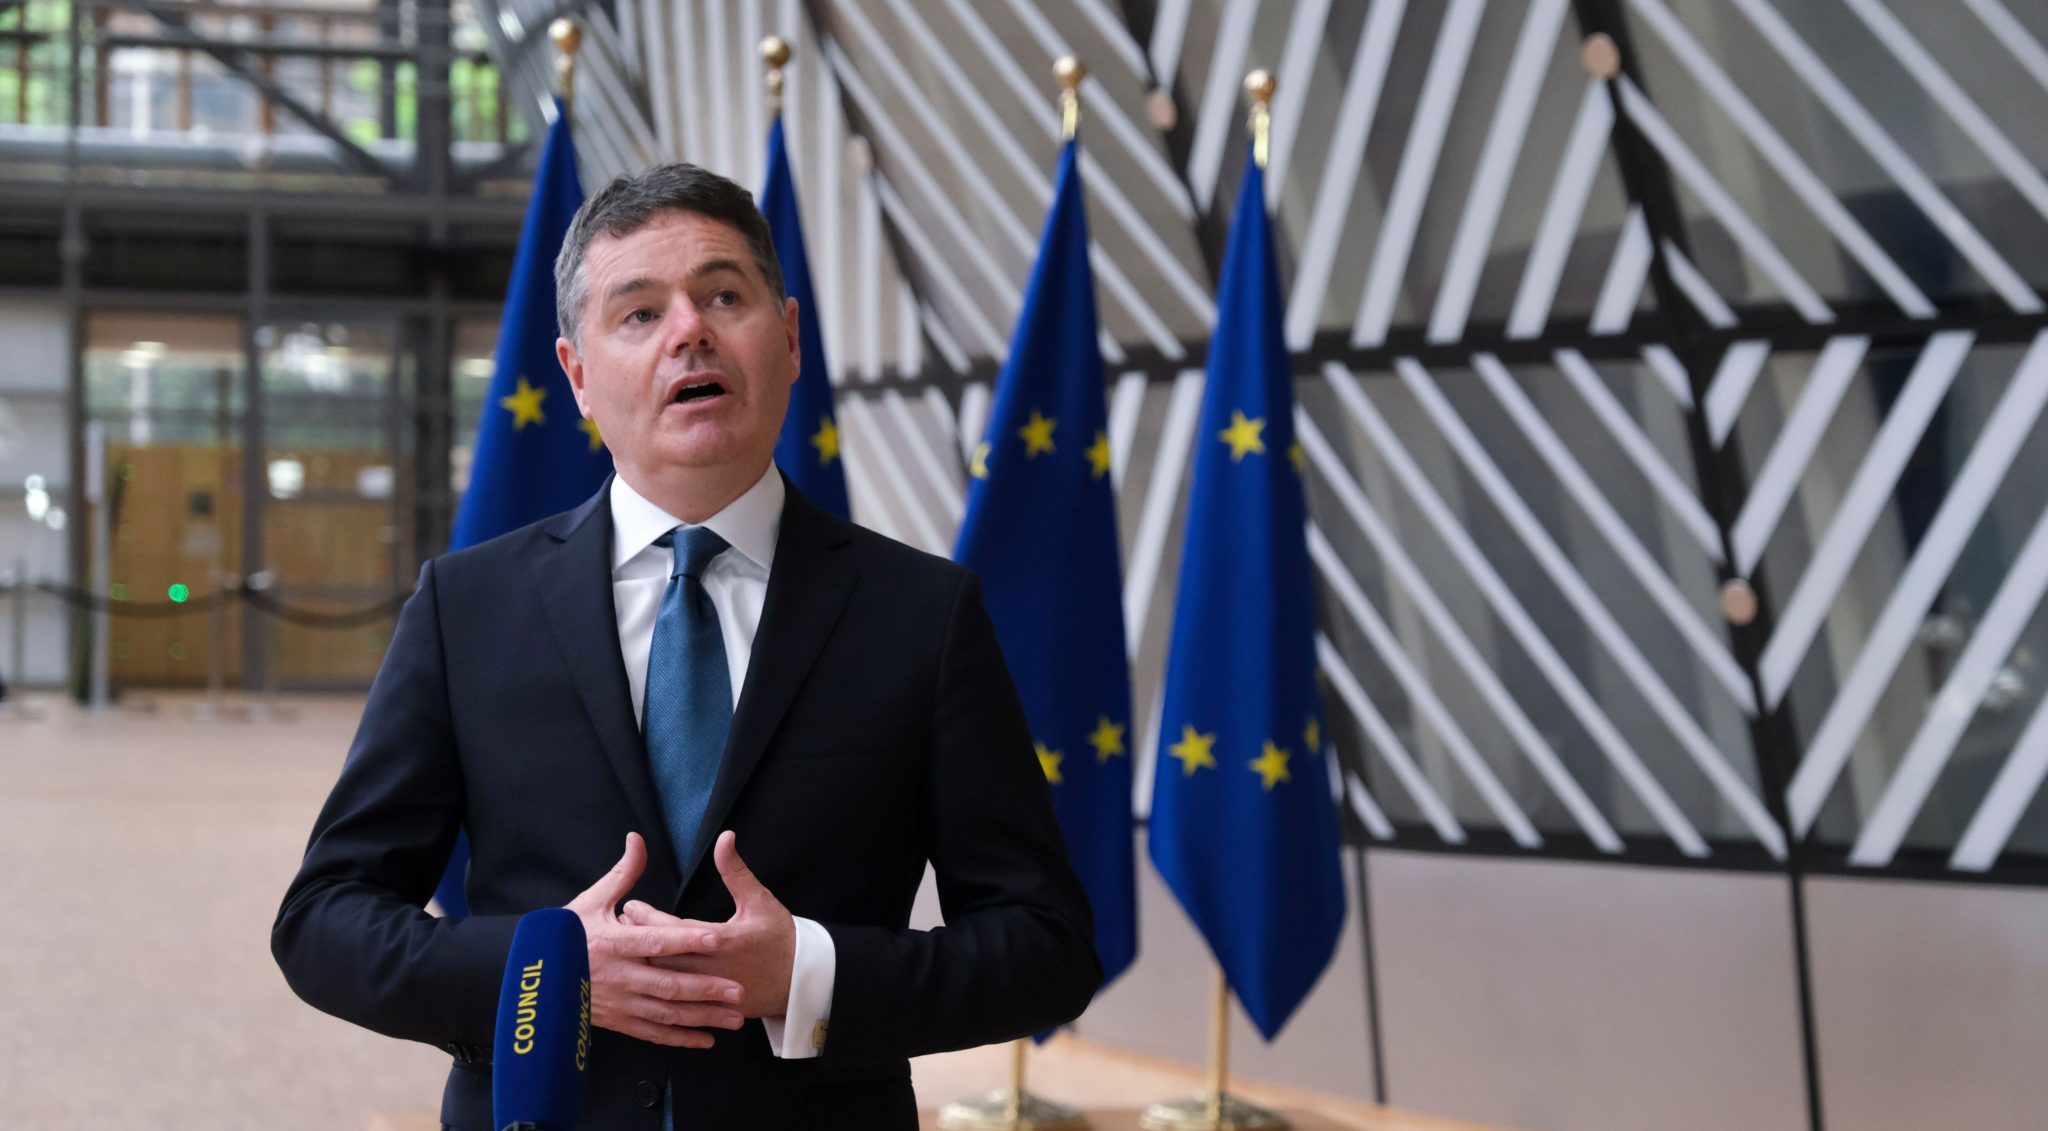 Paschal Donohoe speaks during a meeting of Eurogroup finance ministers in Brussels, Belgium in July 2021.